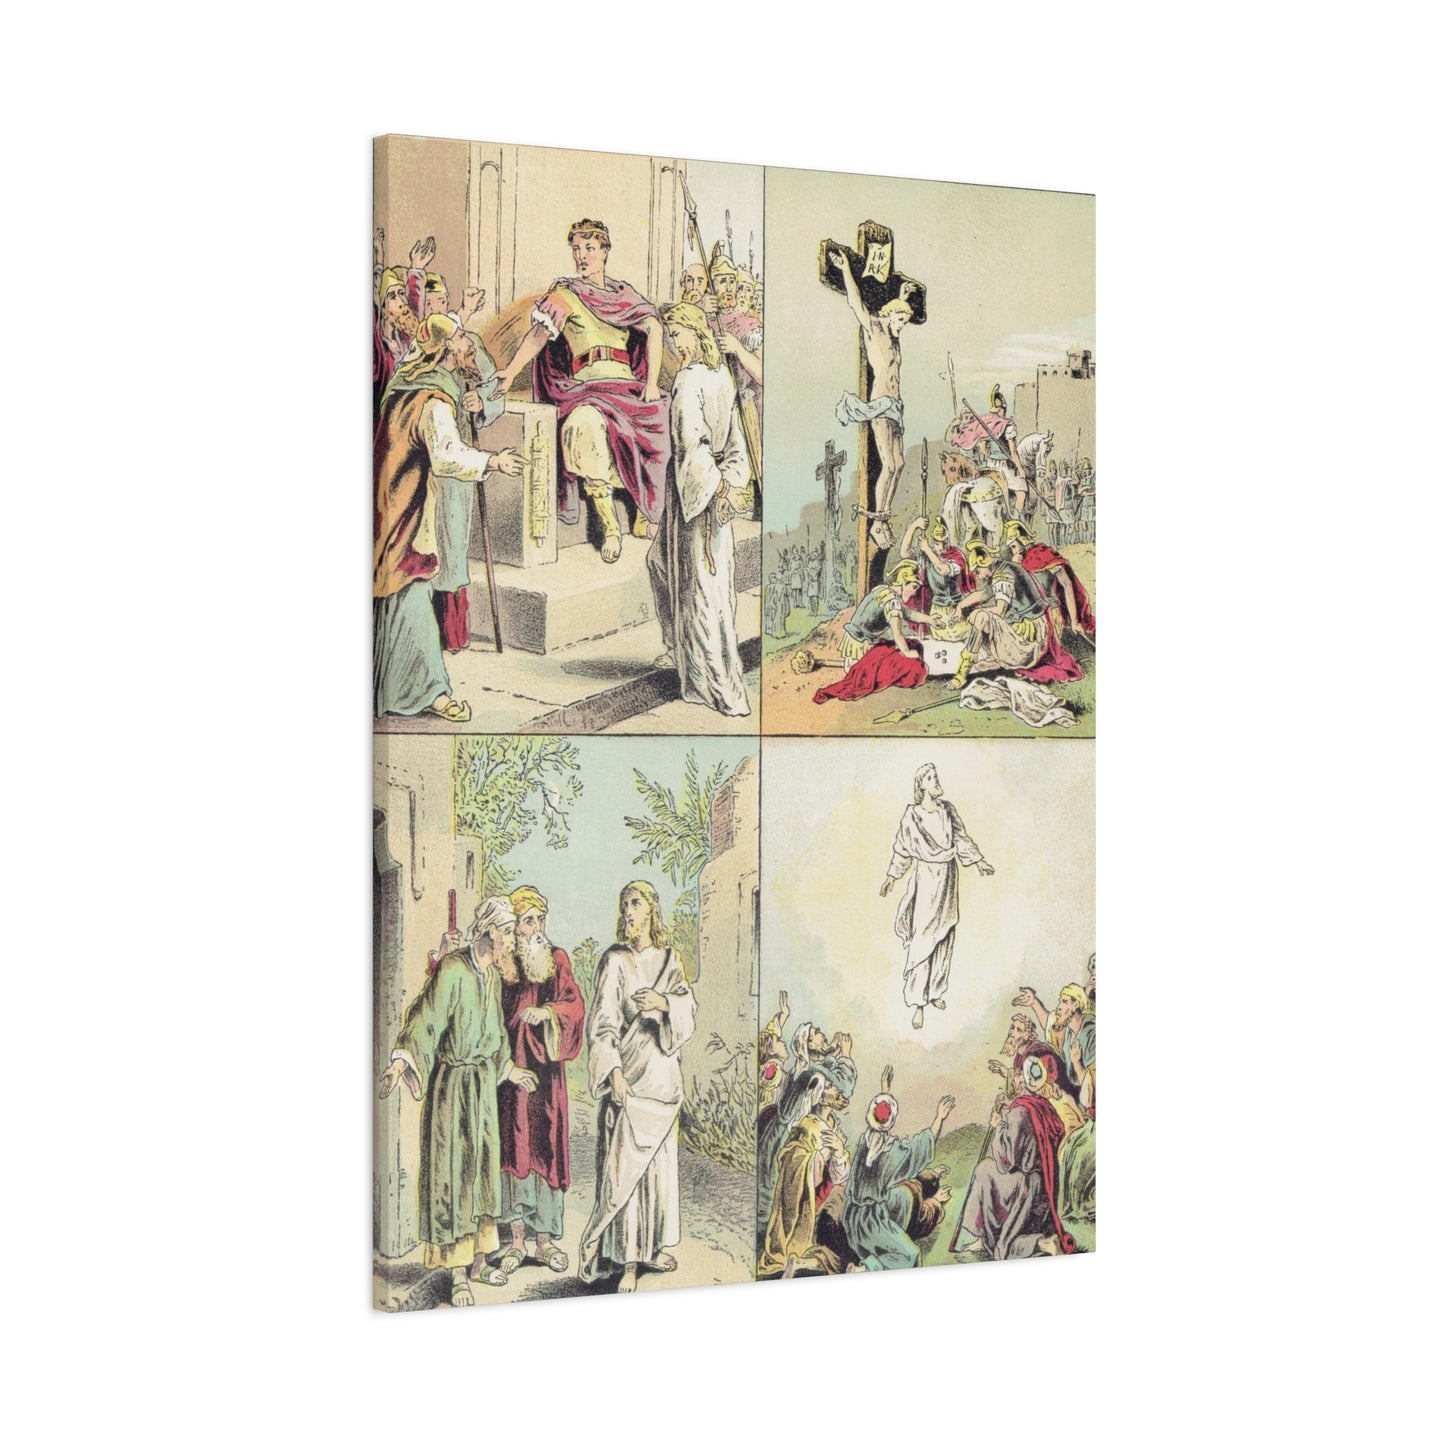 Series of images depicting key moments from the life of Jesus Christ, including His trial, crucifixion, resurrection, and Ascension.